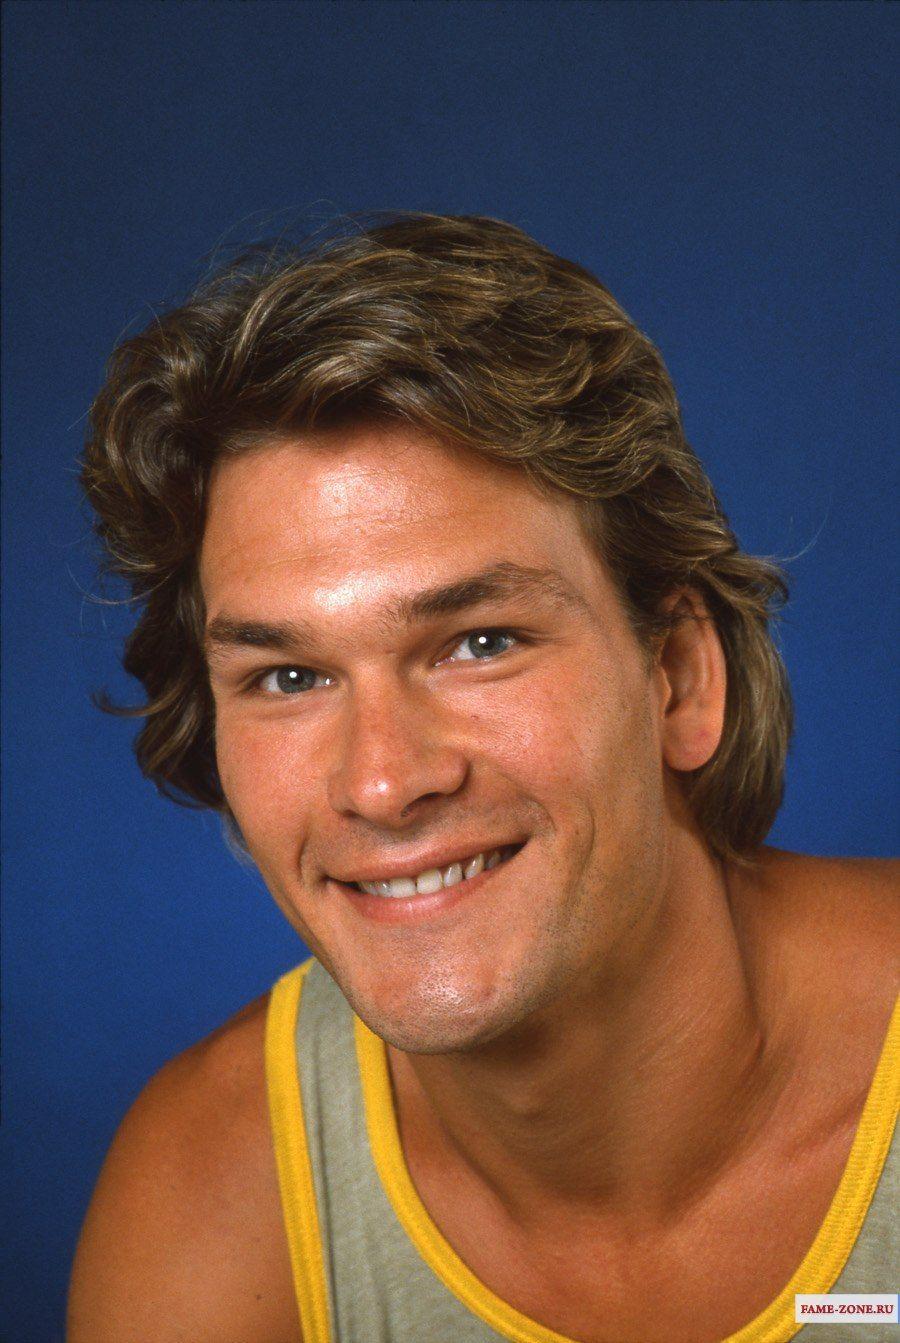 Patrick Swayze When Young. Home / Men / Patrick Swayze / Download